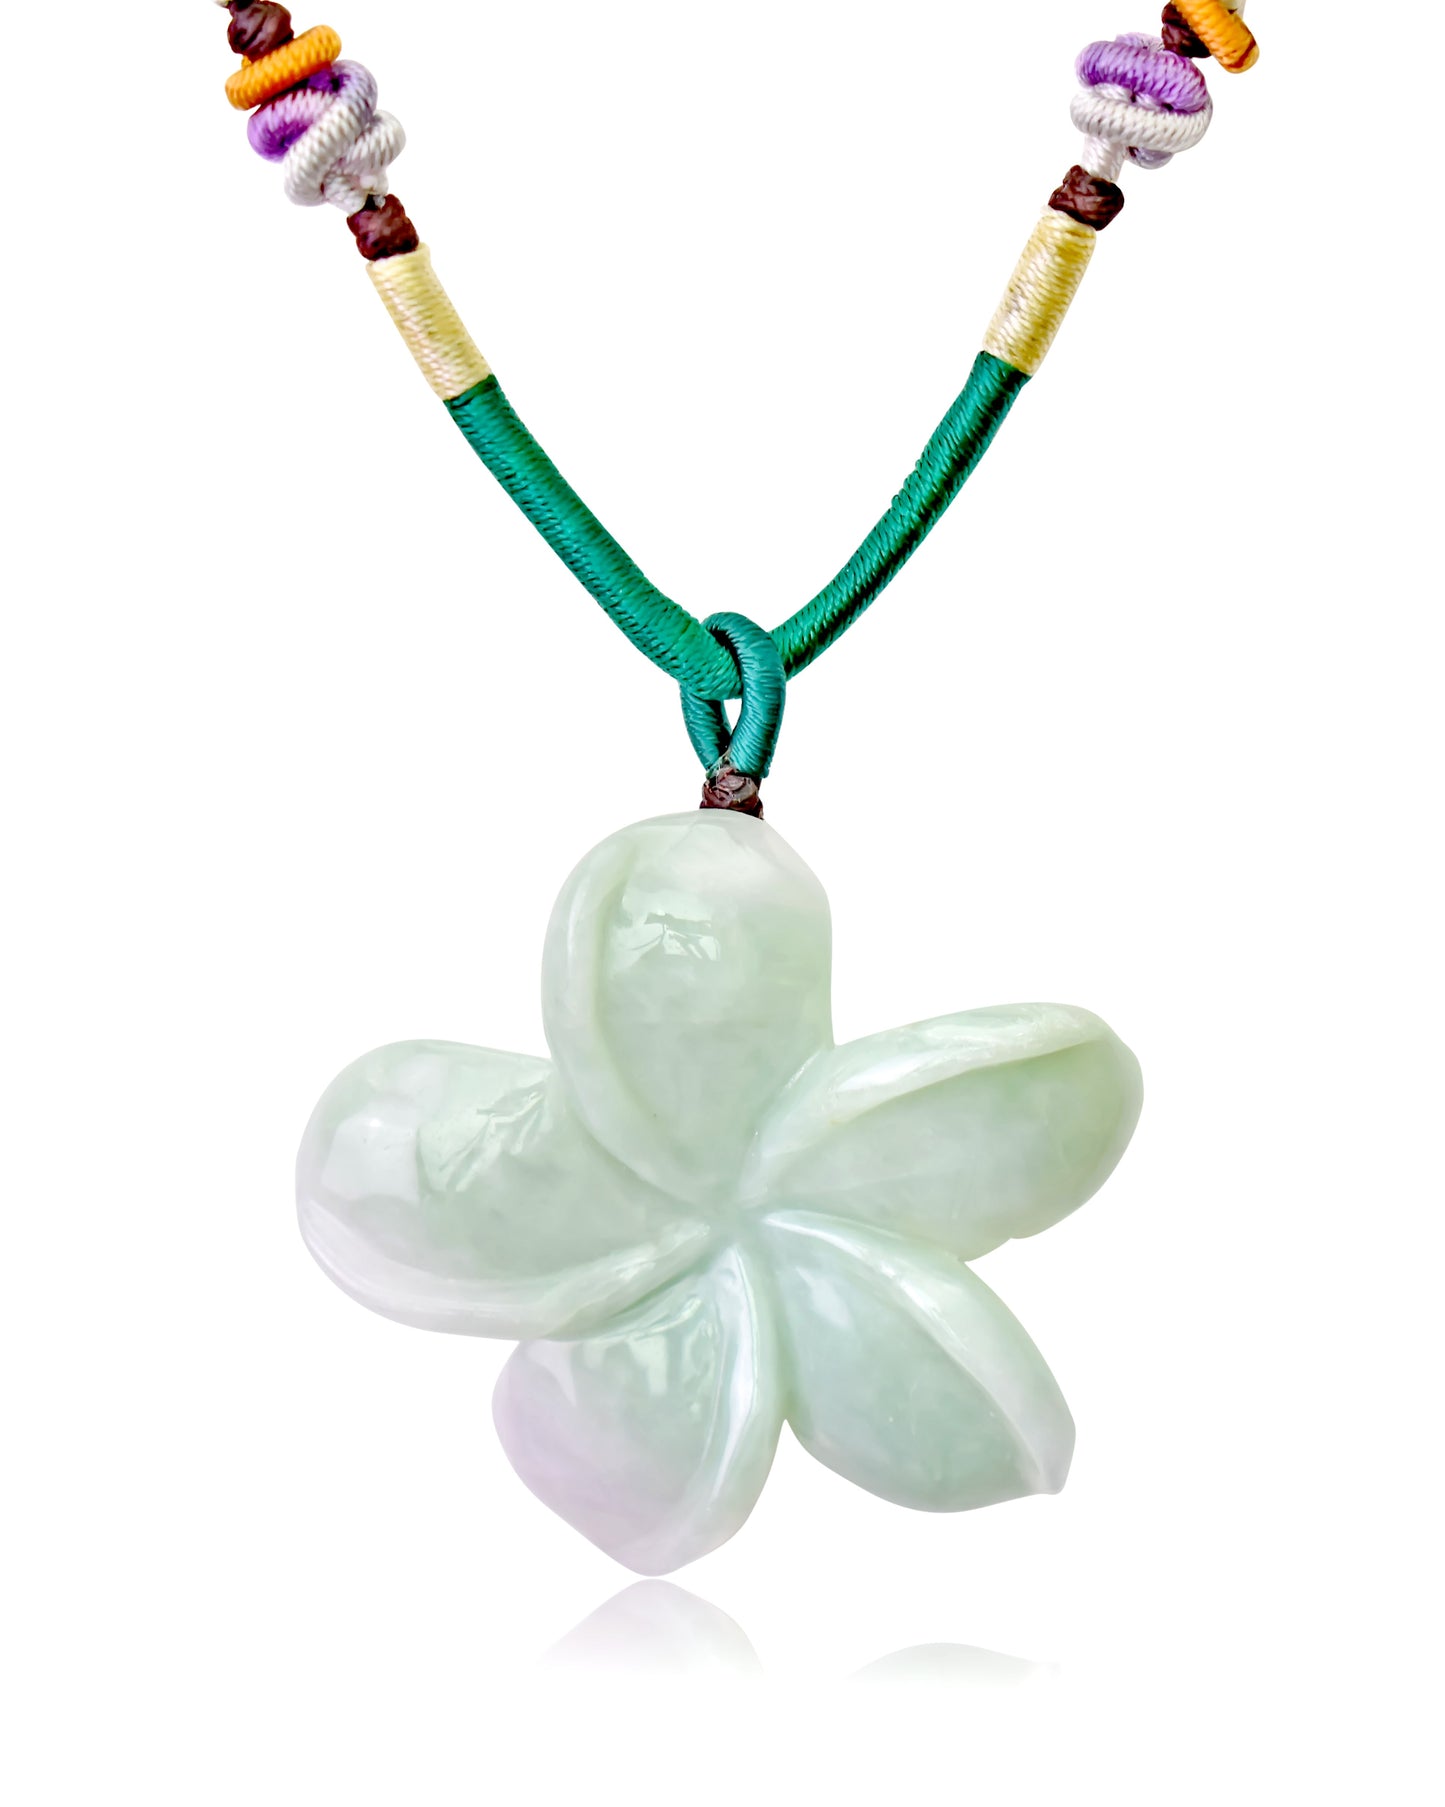 Accessorize in Beauty with Plumeria Flower Jade Necklace